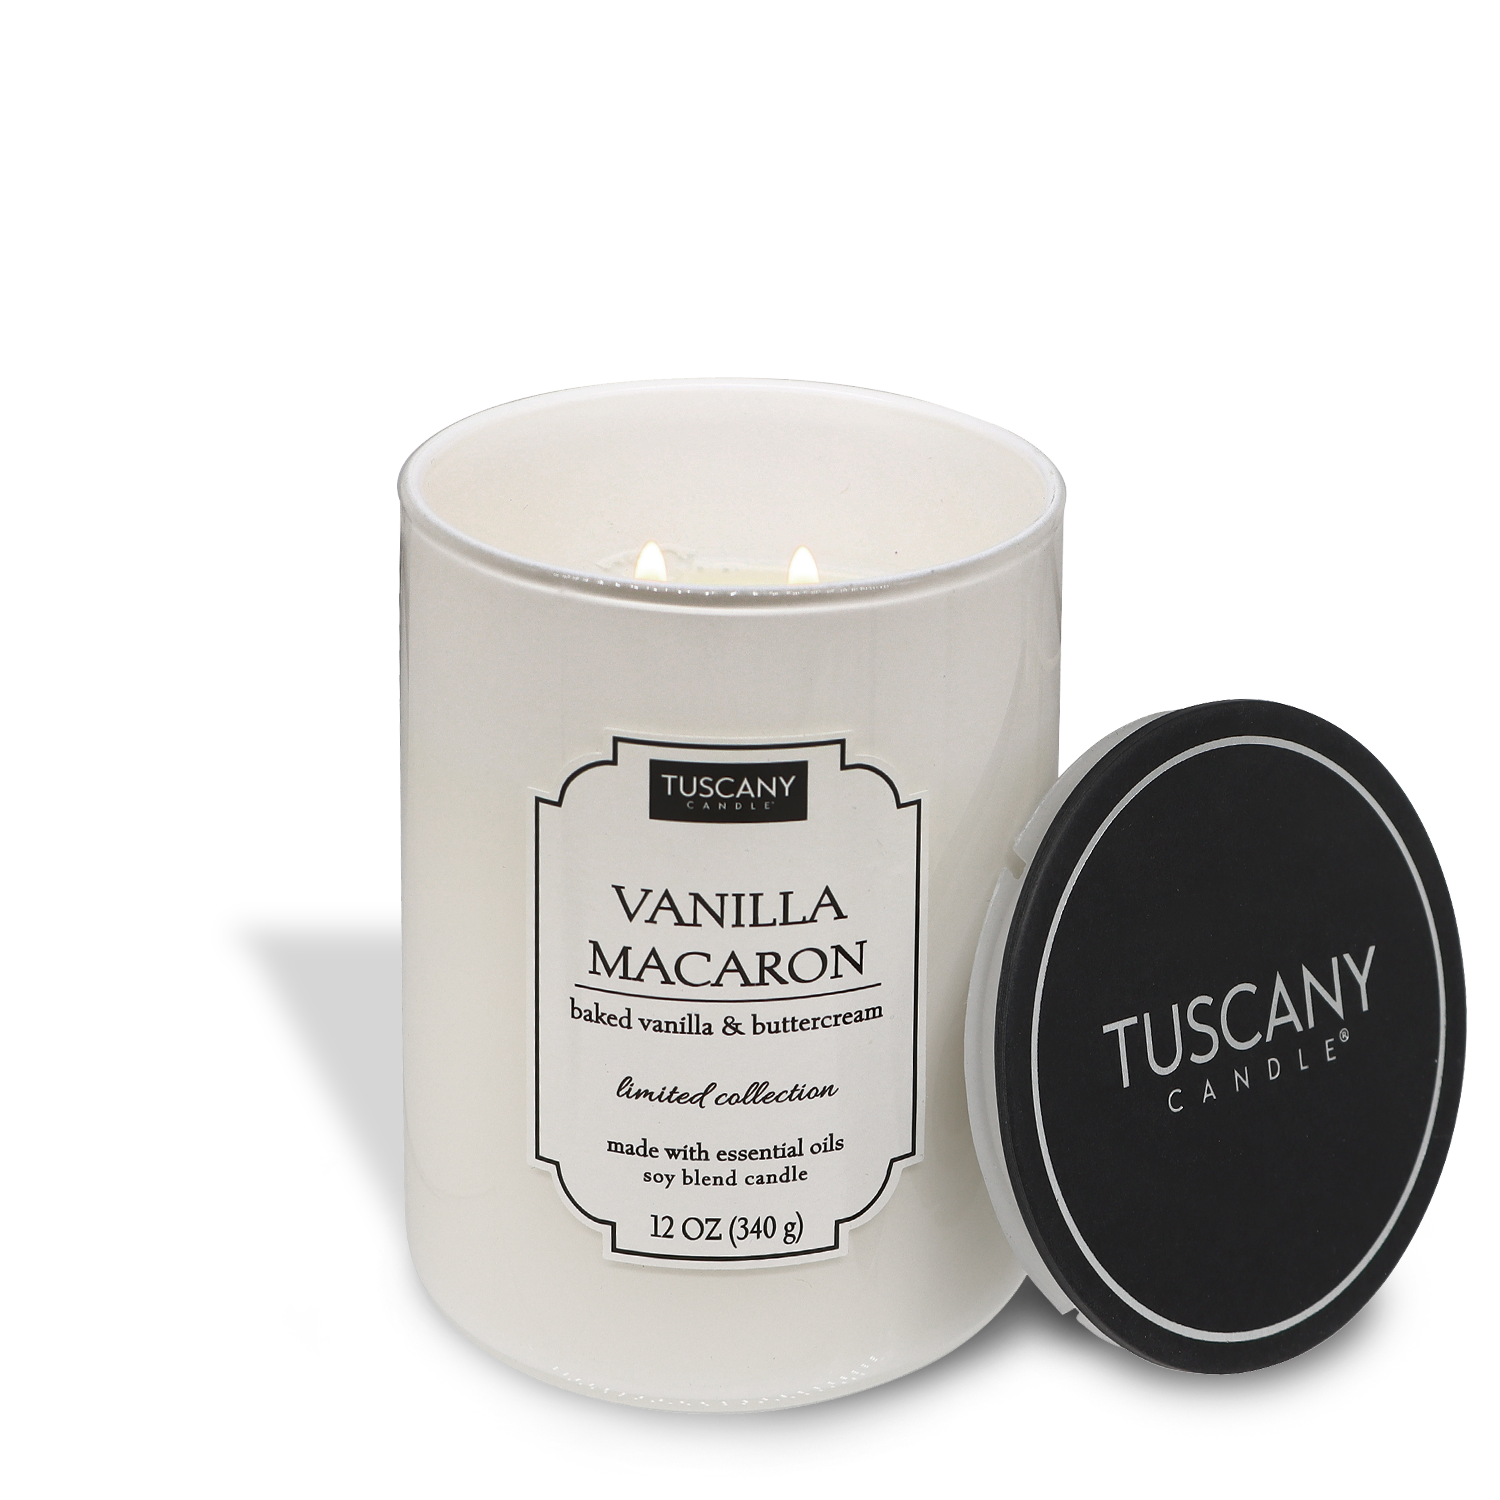 A lit Vanilla Macaron (12 oz) candle from the Colorsplash collection by Tuscany Candle® EVD, with its black lid placed to the right, against a white background.